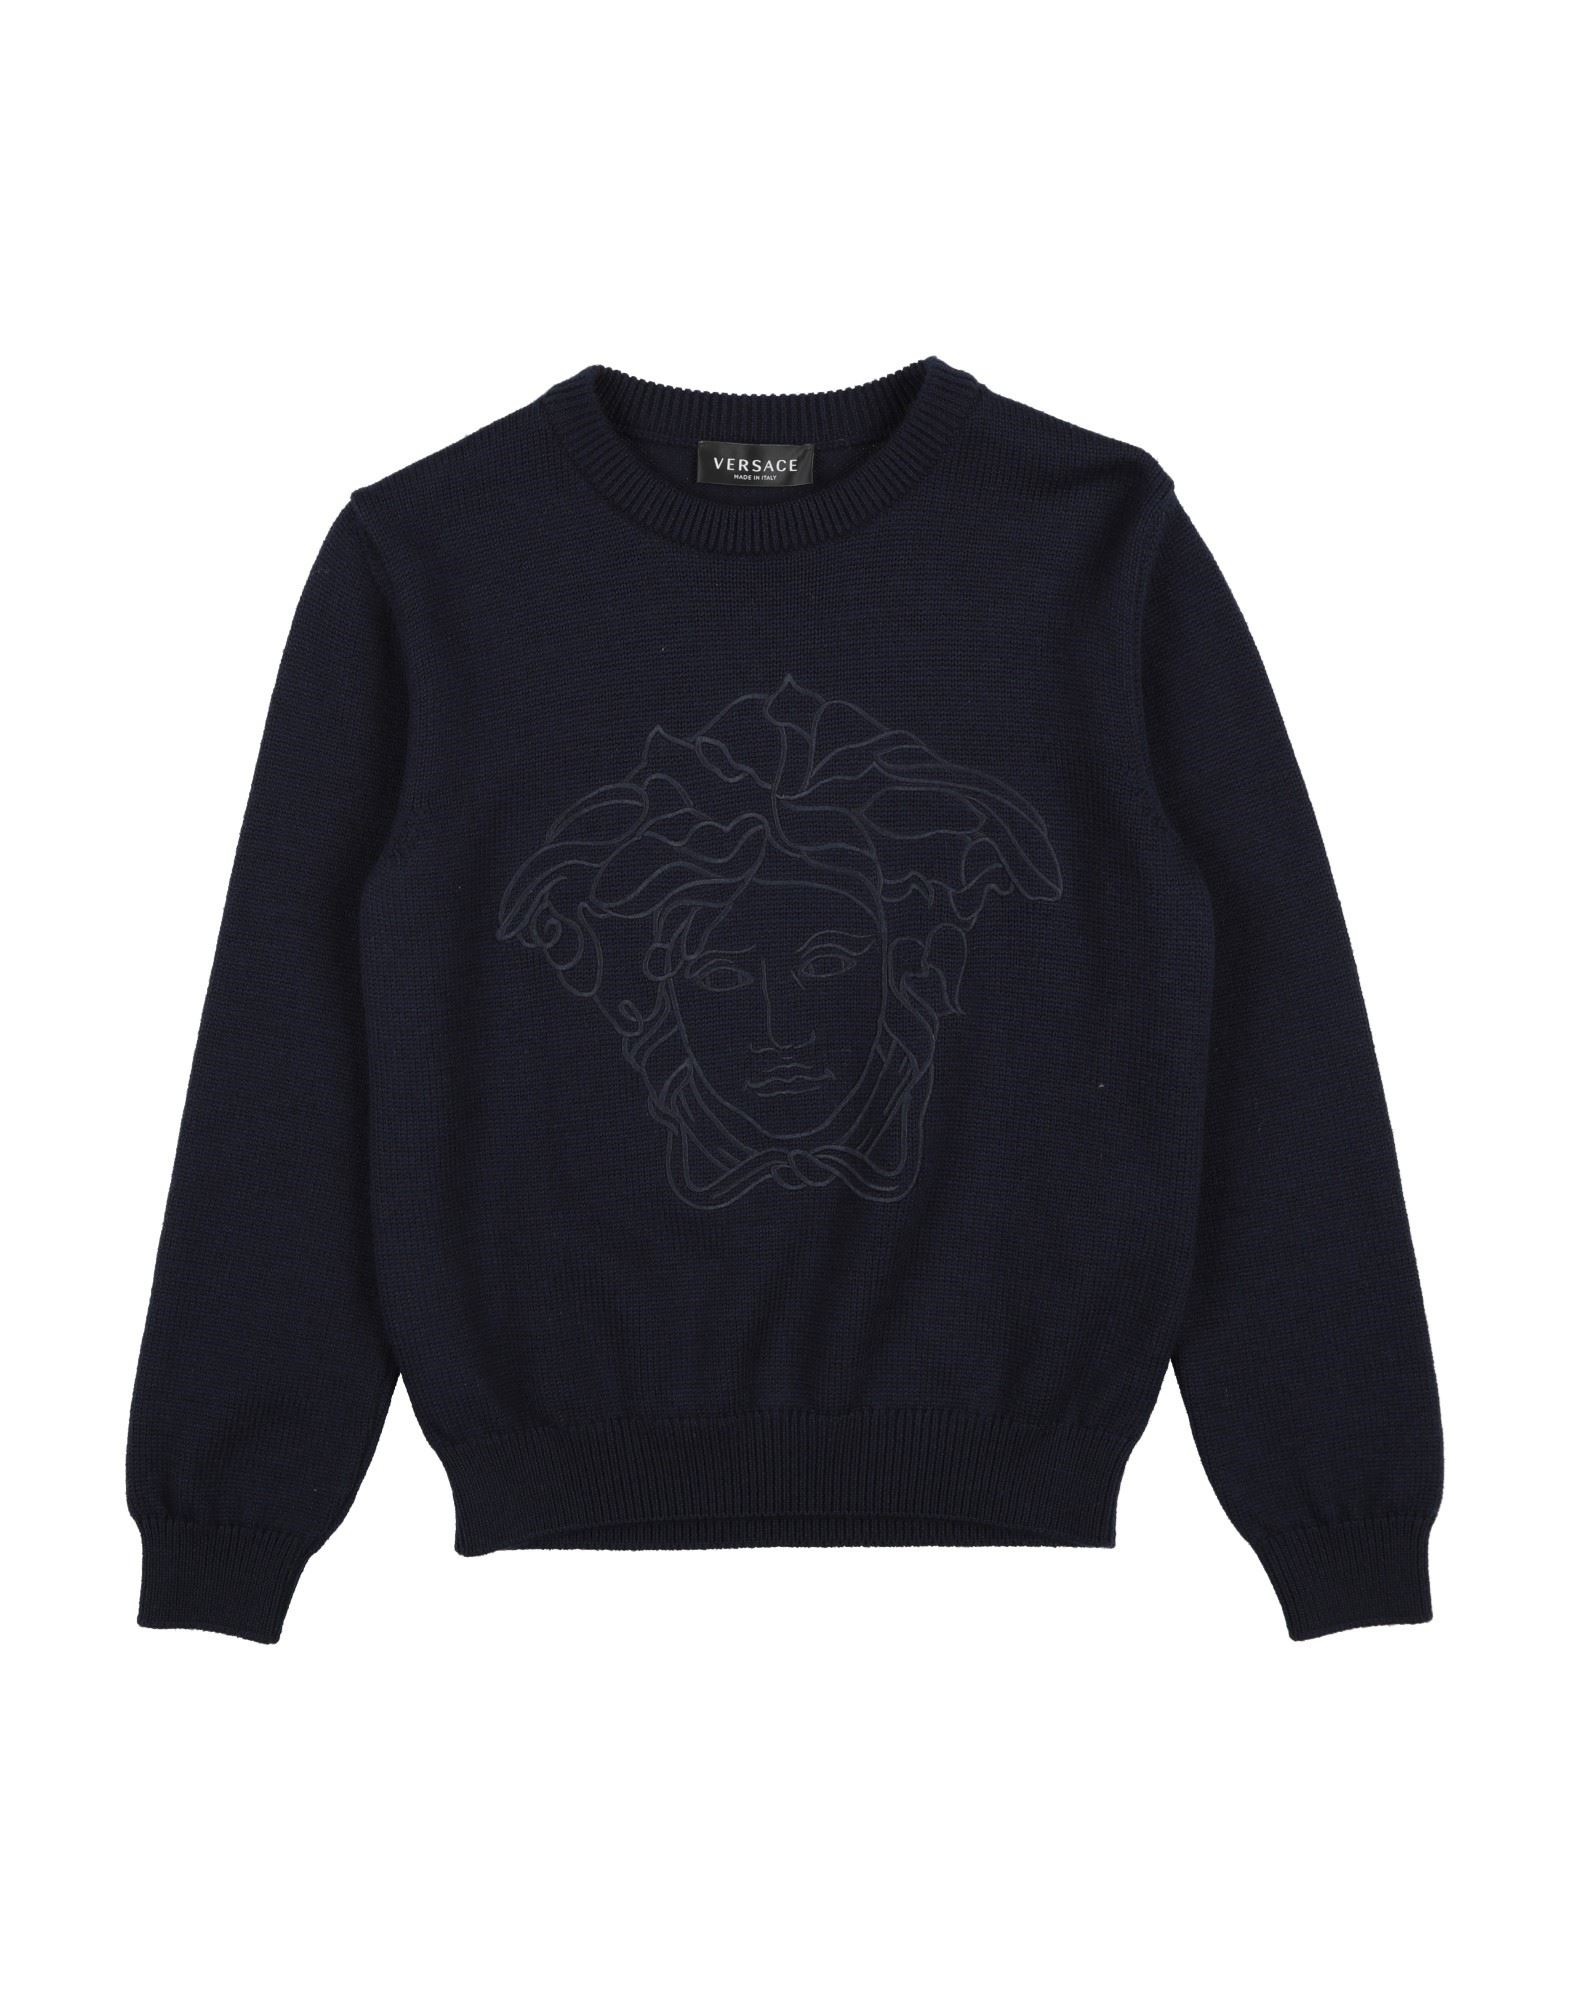 VERSACE YOUNG Pullover Kinder Nachtblau von VERSACE YOUNG